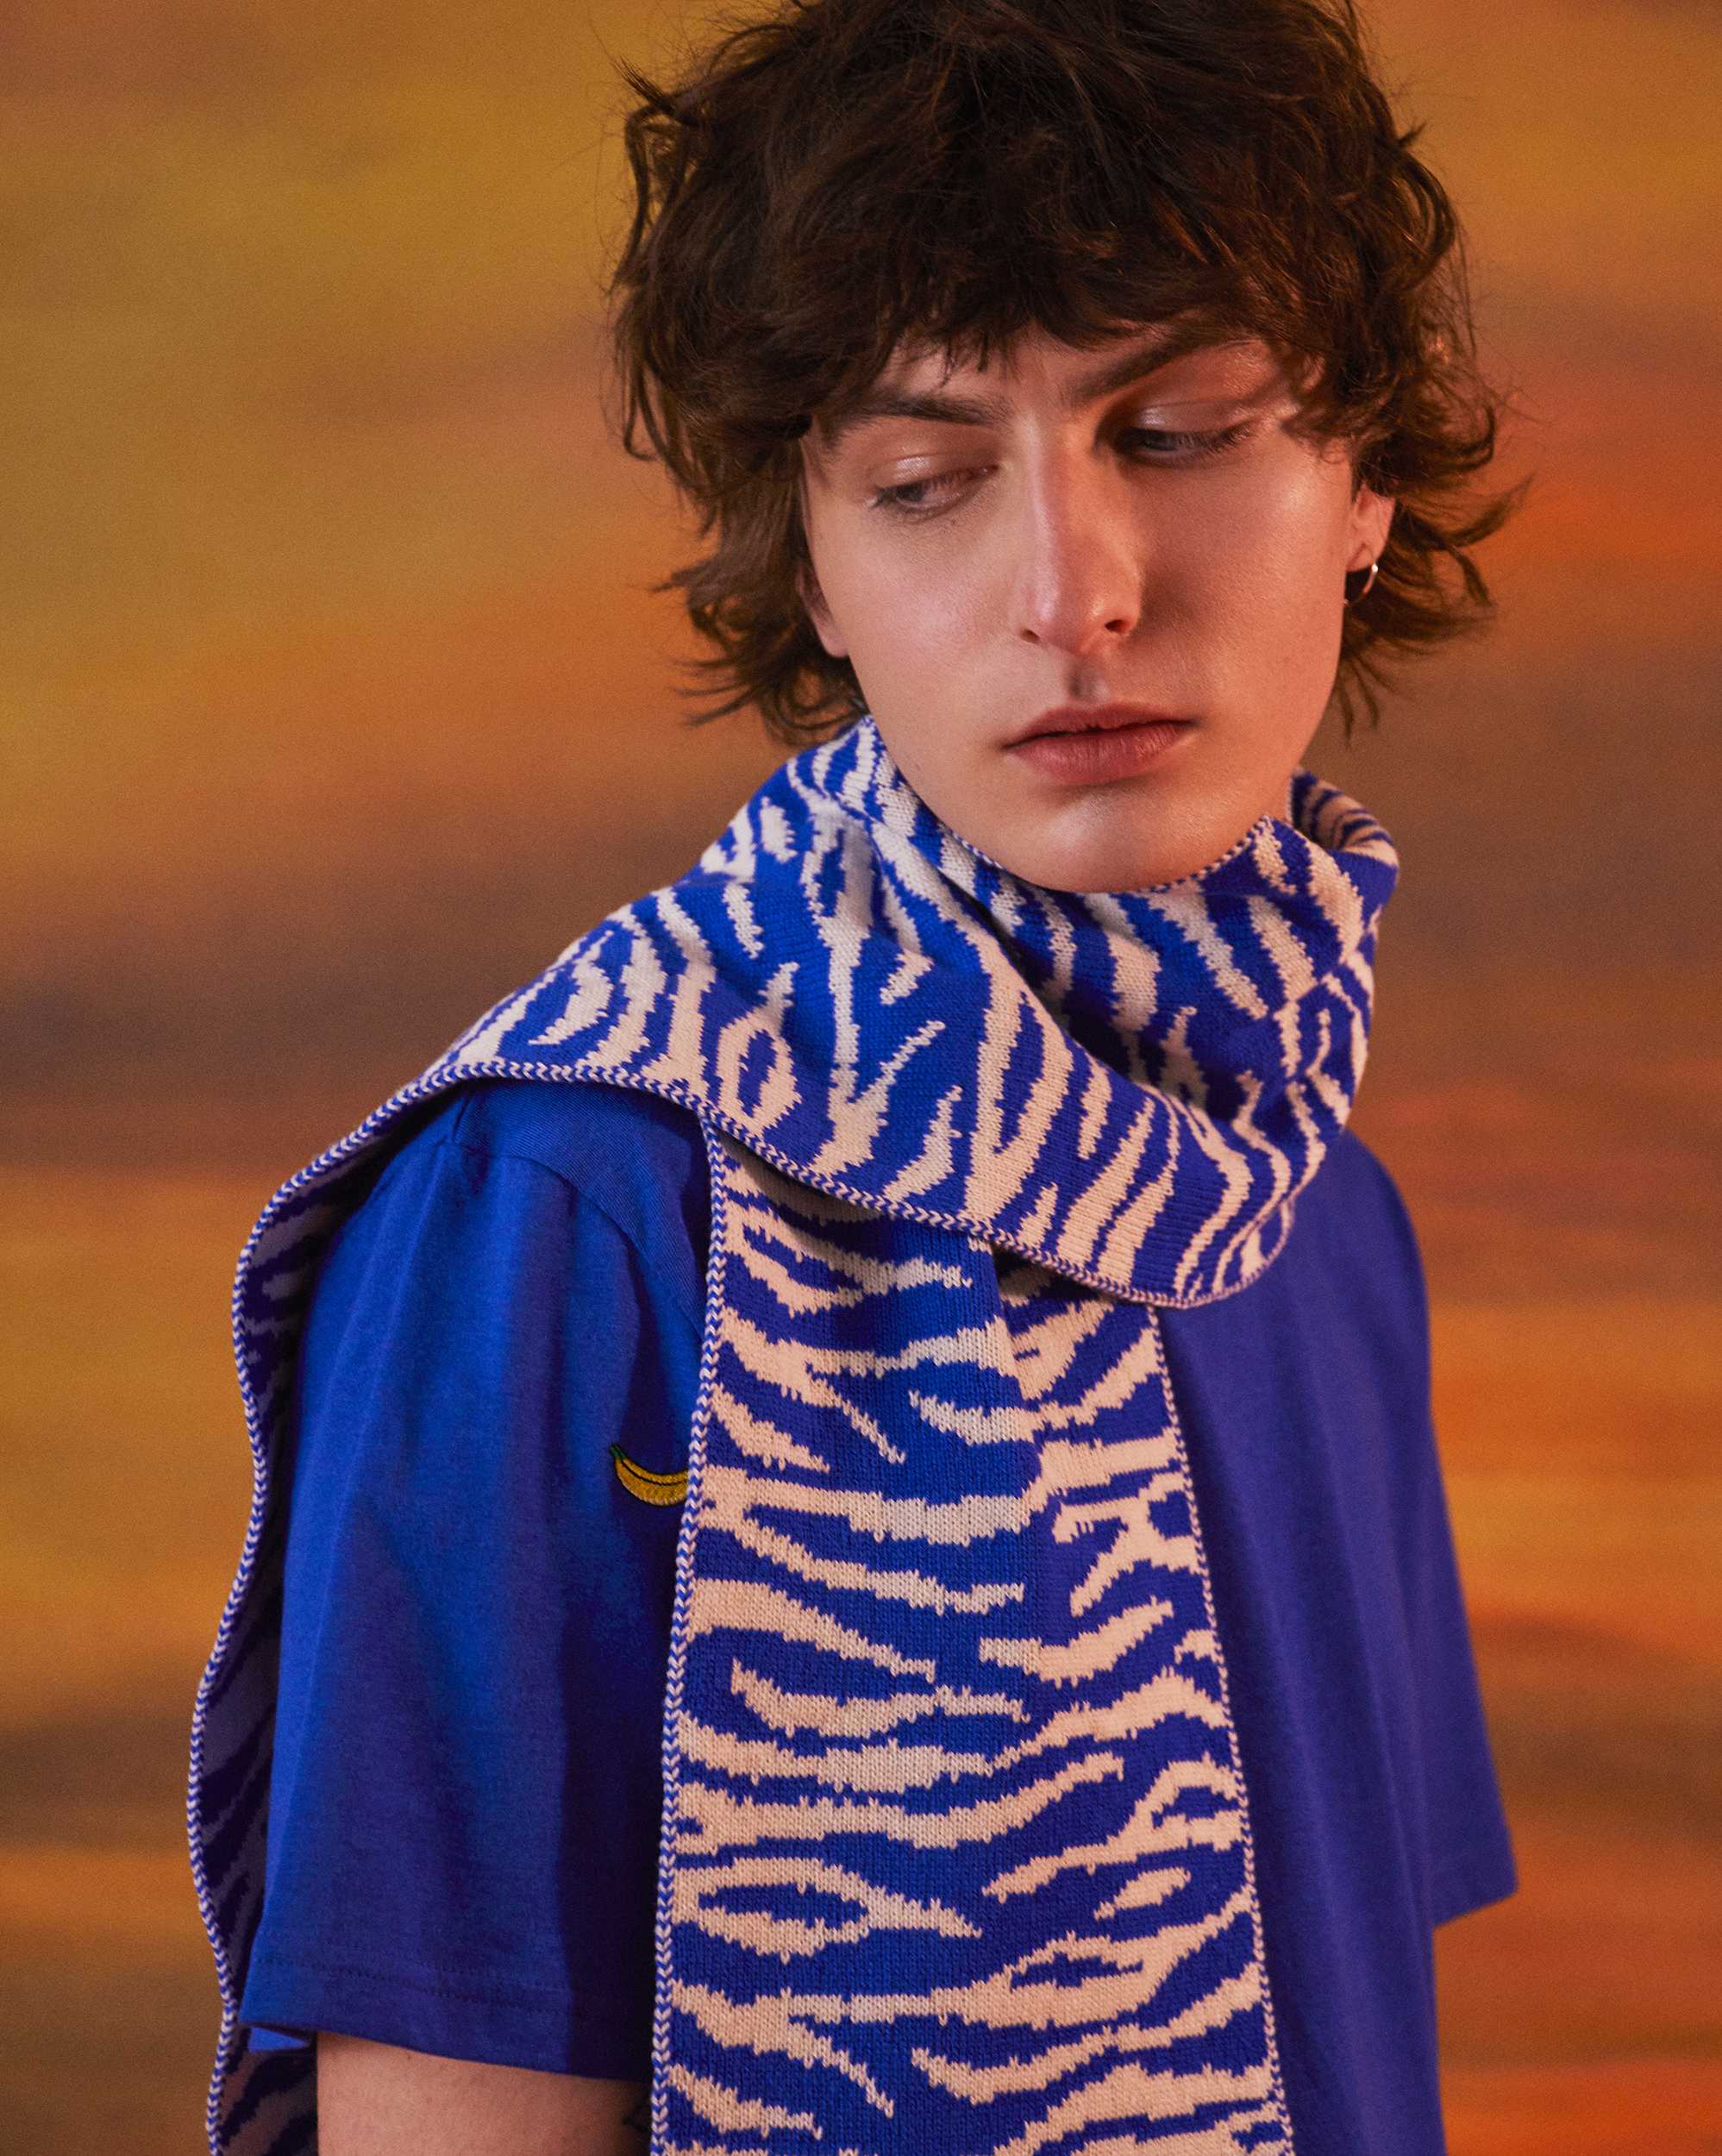 Tiger patterned blue knitted scarf on a male model